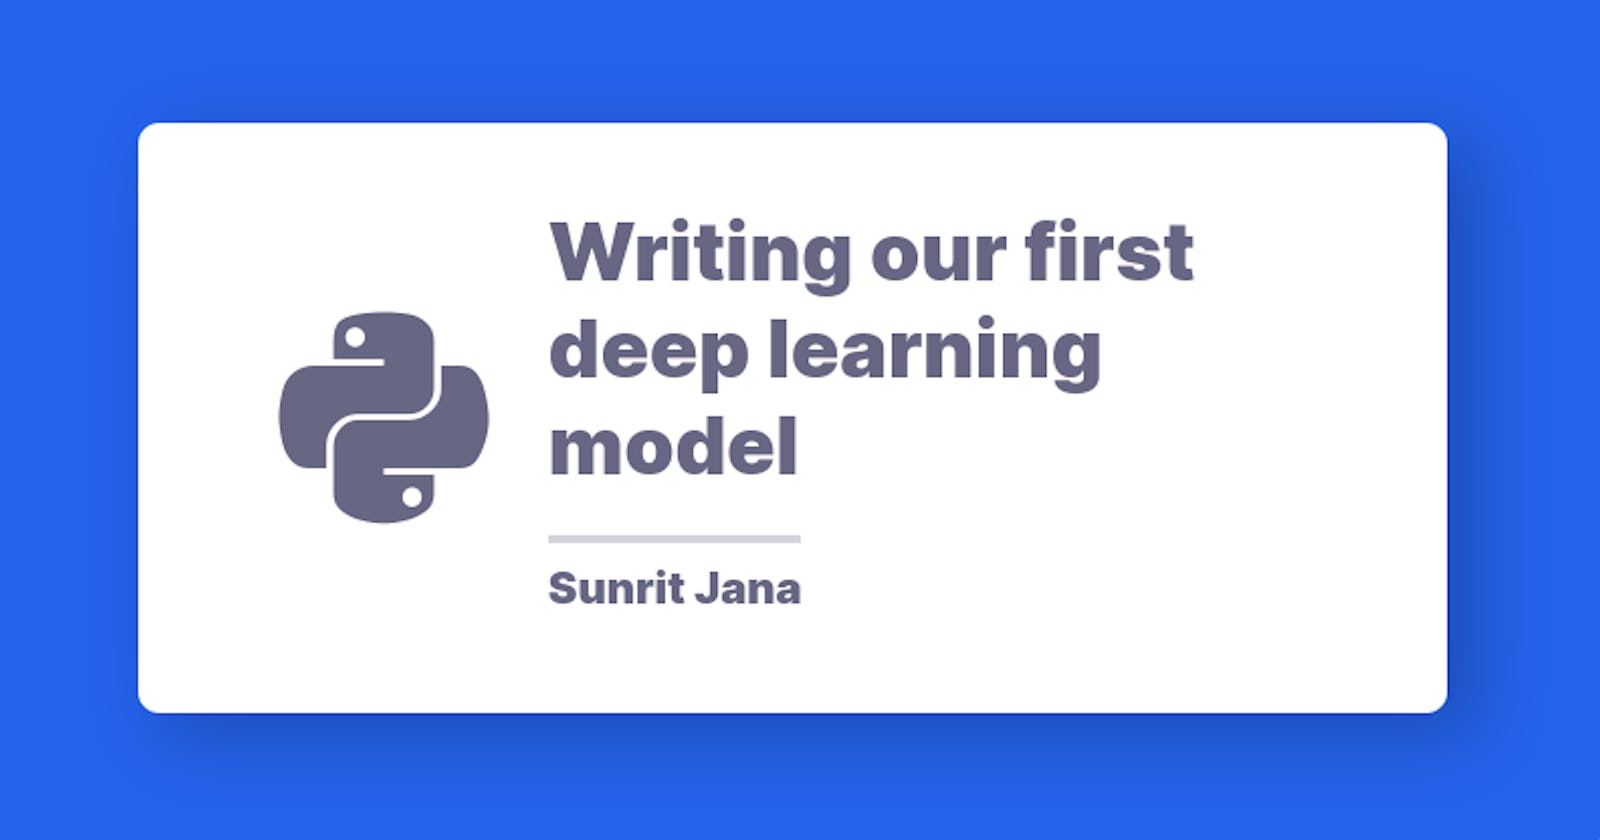 Writing our first deep learning model